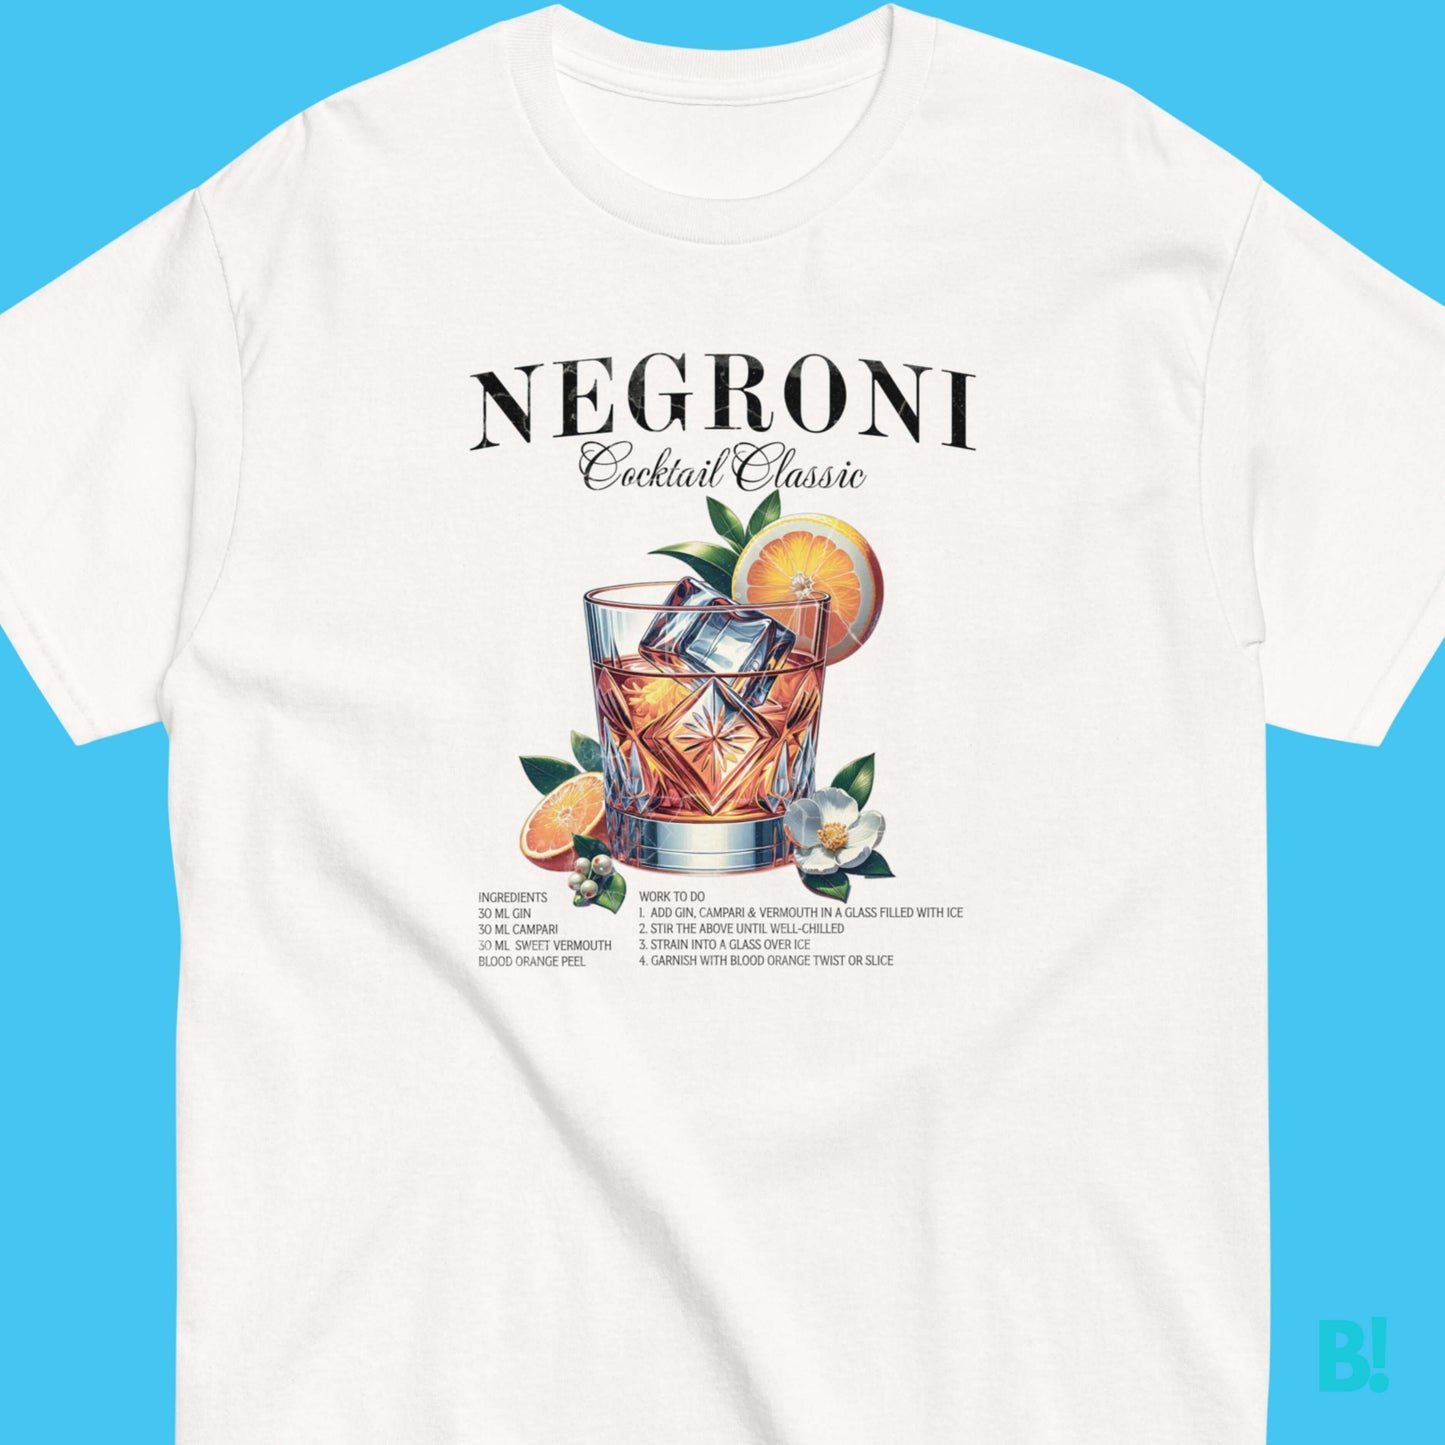 NEGRONI COCKTAIL T-Shirt | 100% Cotton | B!NKY Design Luxurious 100% cotton Negroni T-Shirt, unisex fit, available in 5 colors. Embrace elegance with our exclusive Negroni design by B!NKY Comfywear. €29.50 B!NKY Comfywear